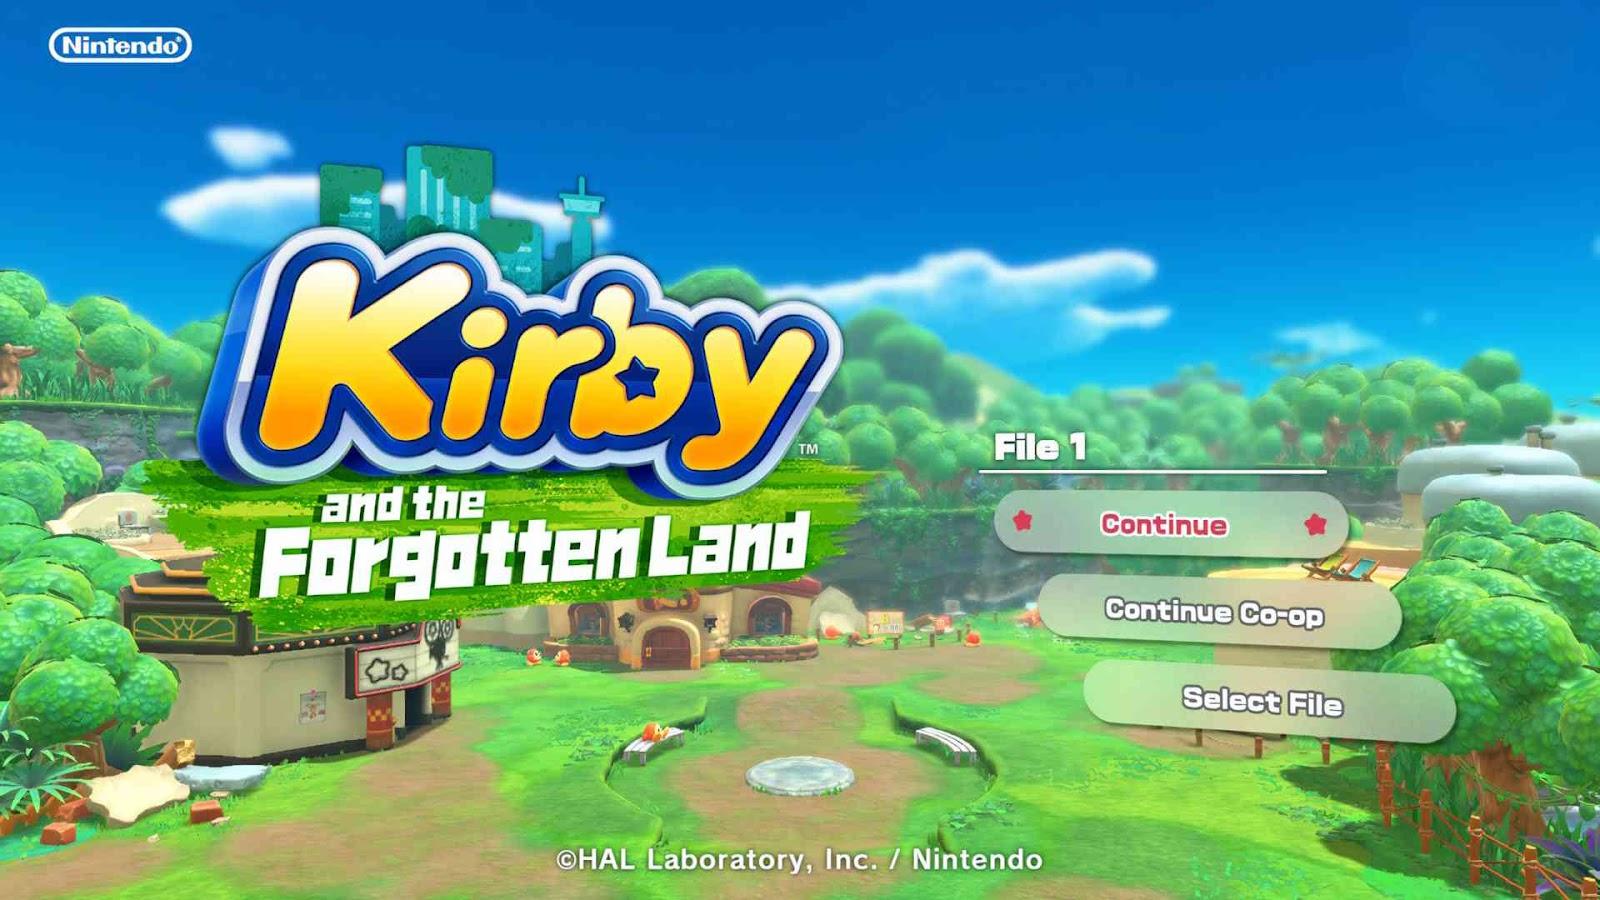 2.Kirby and the Forgotten Land